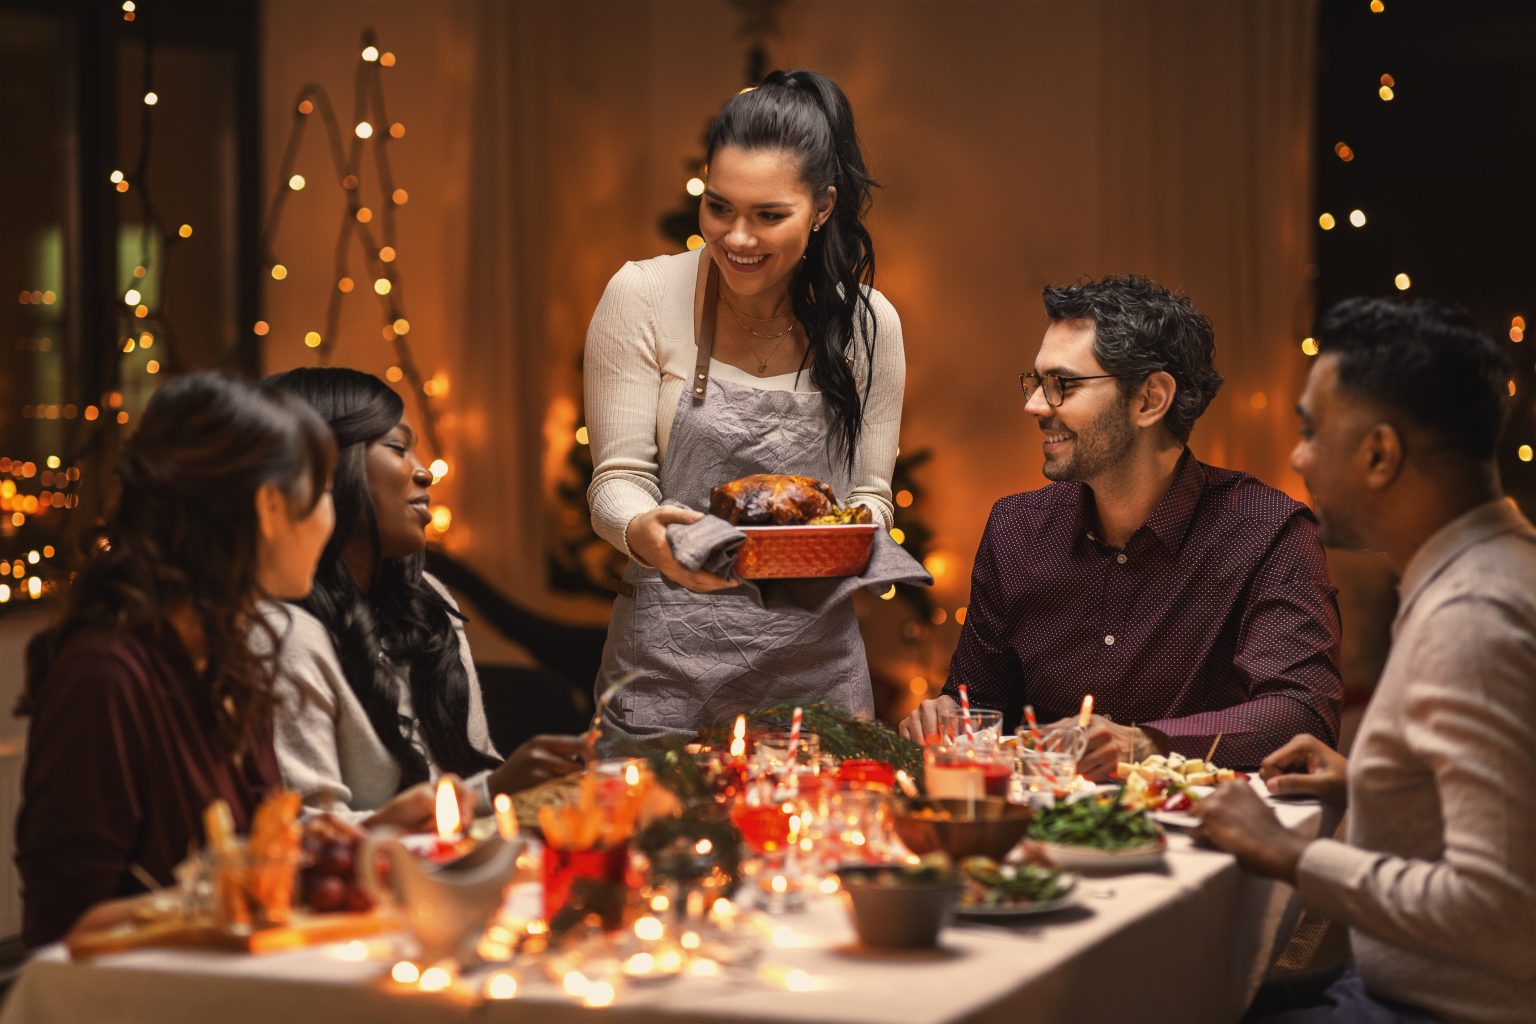 How are consumers changing their festive food choices?